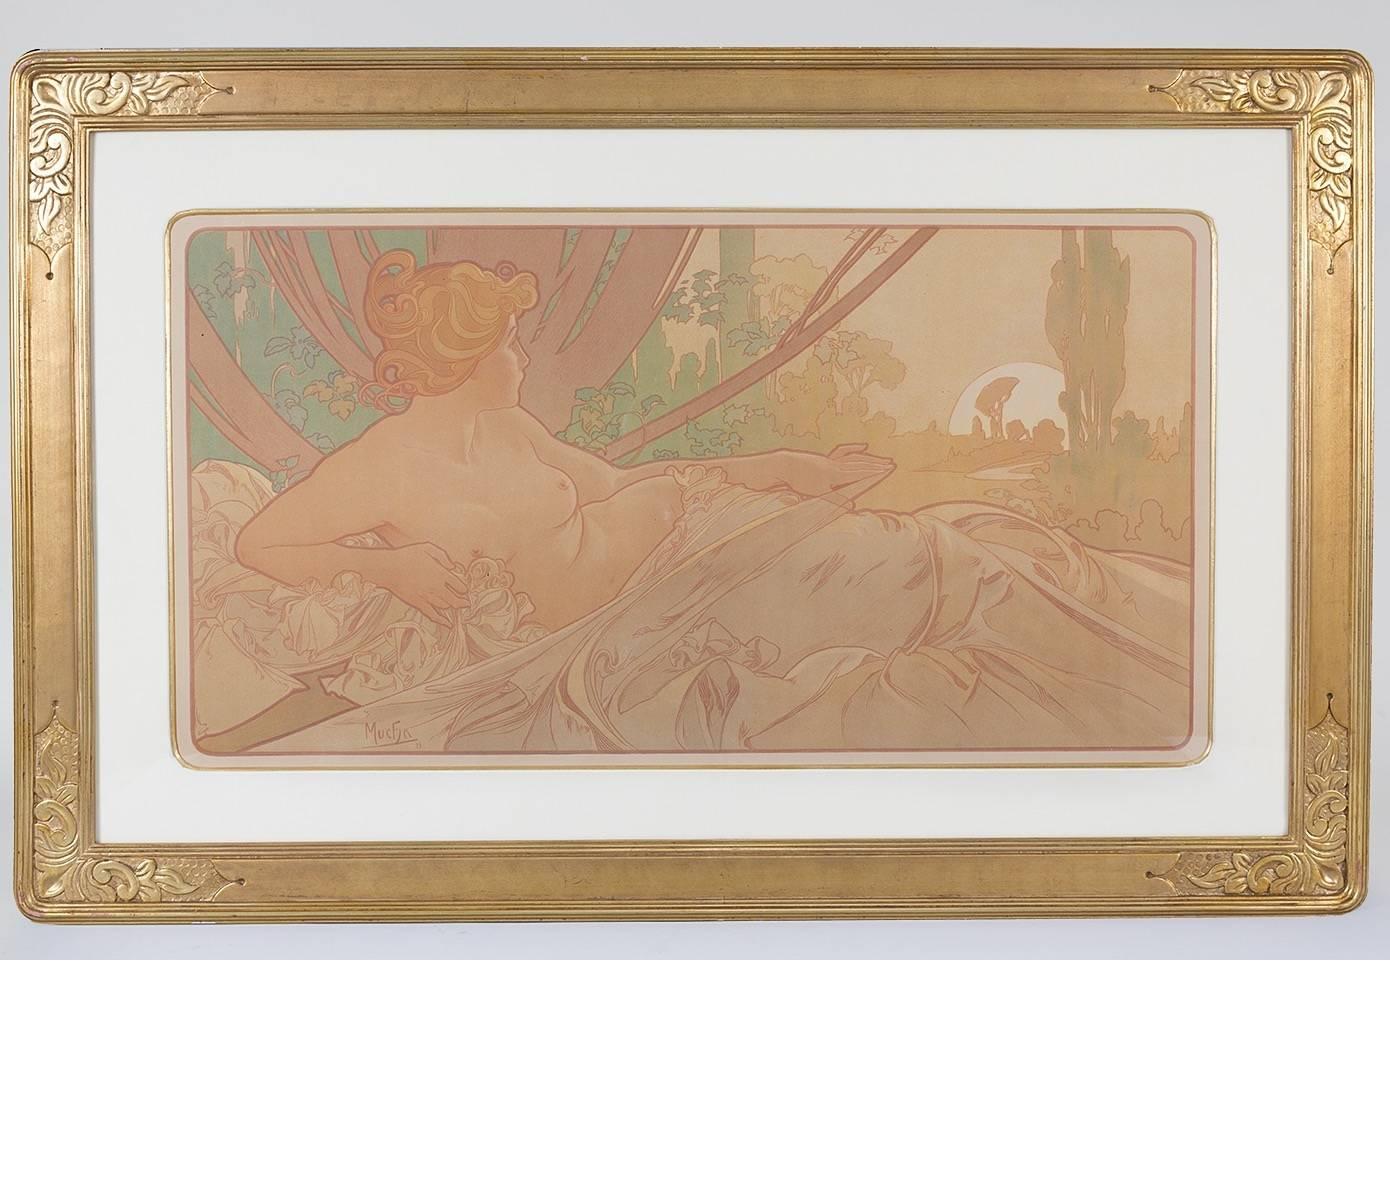 This pair of French Art Nouveau lithographs, 